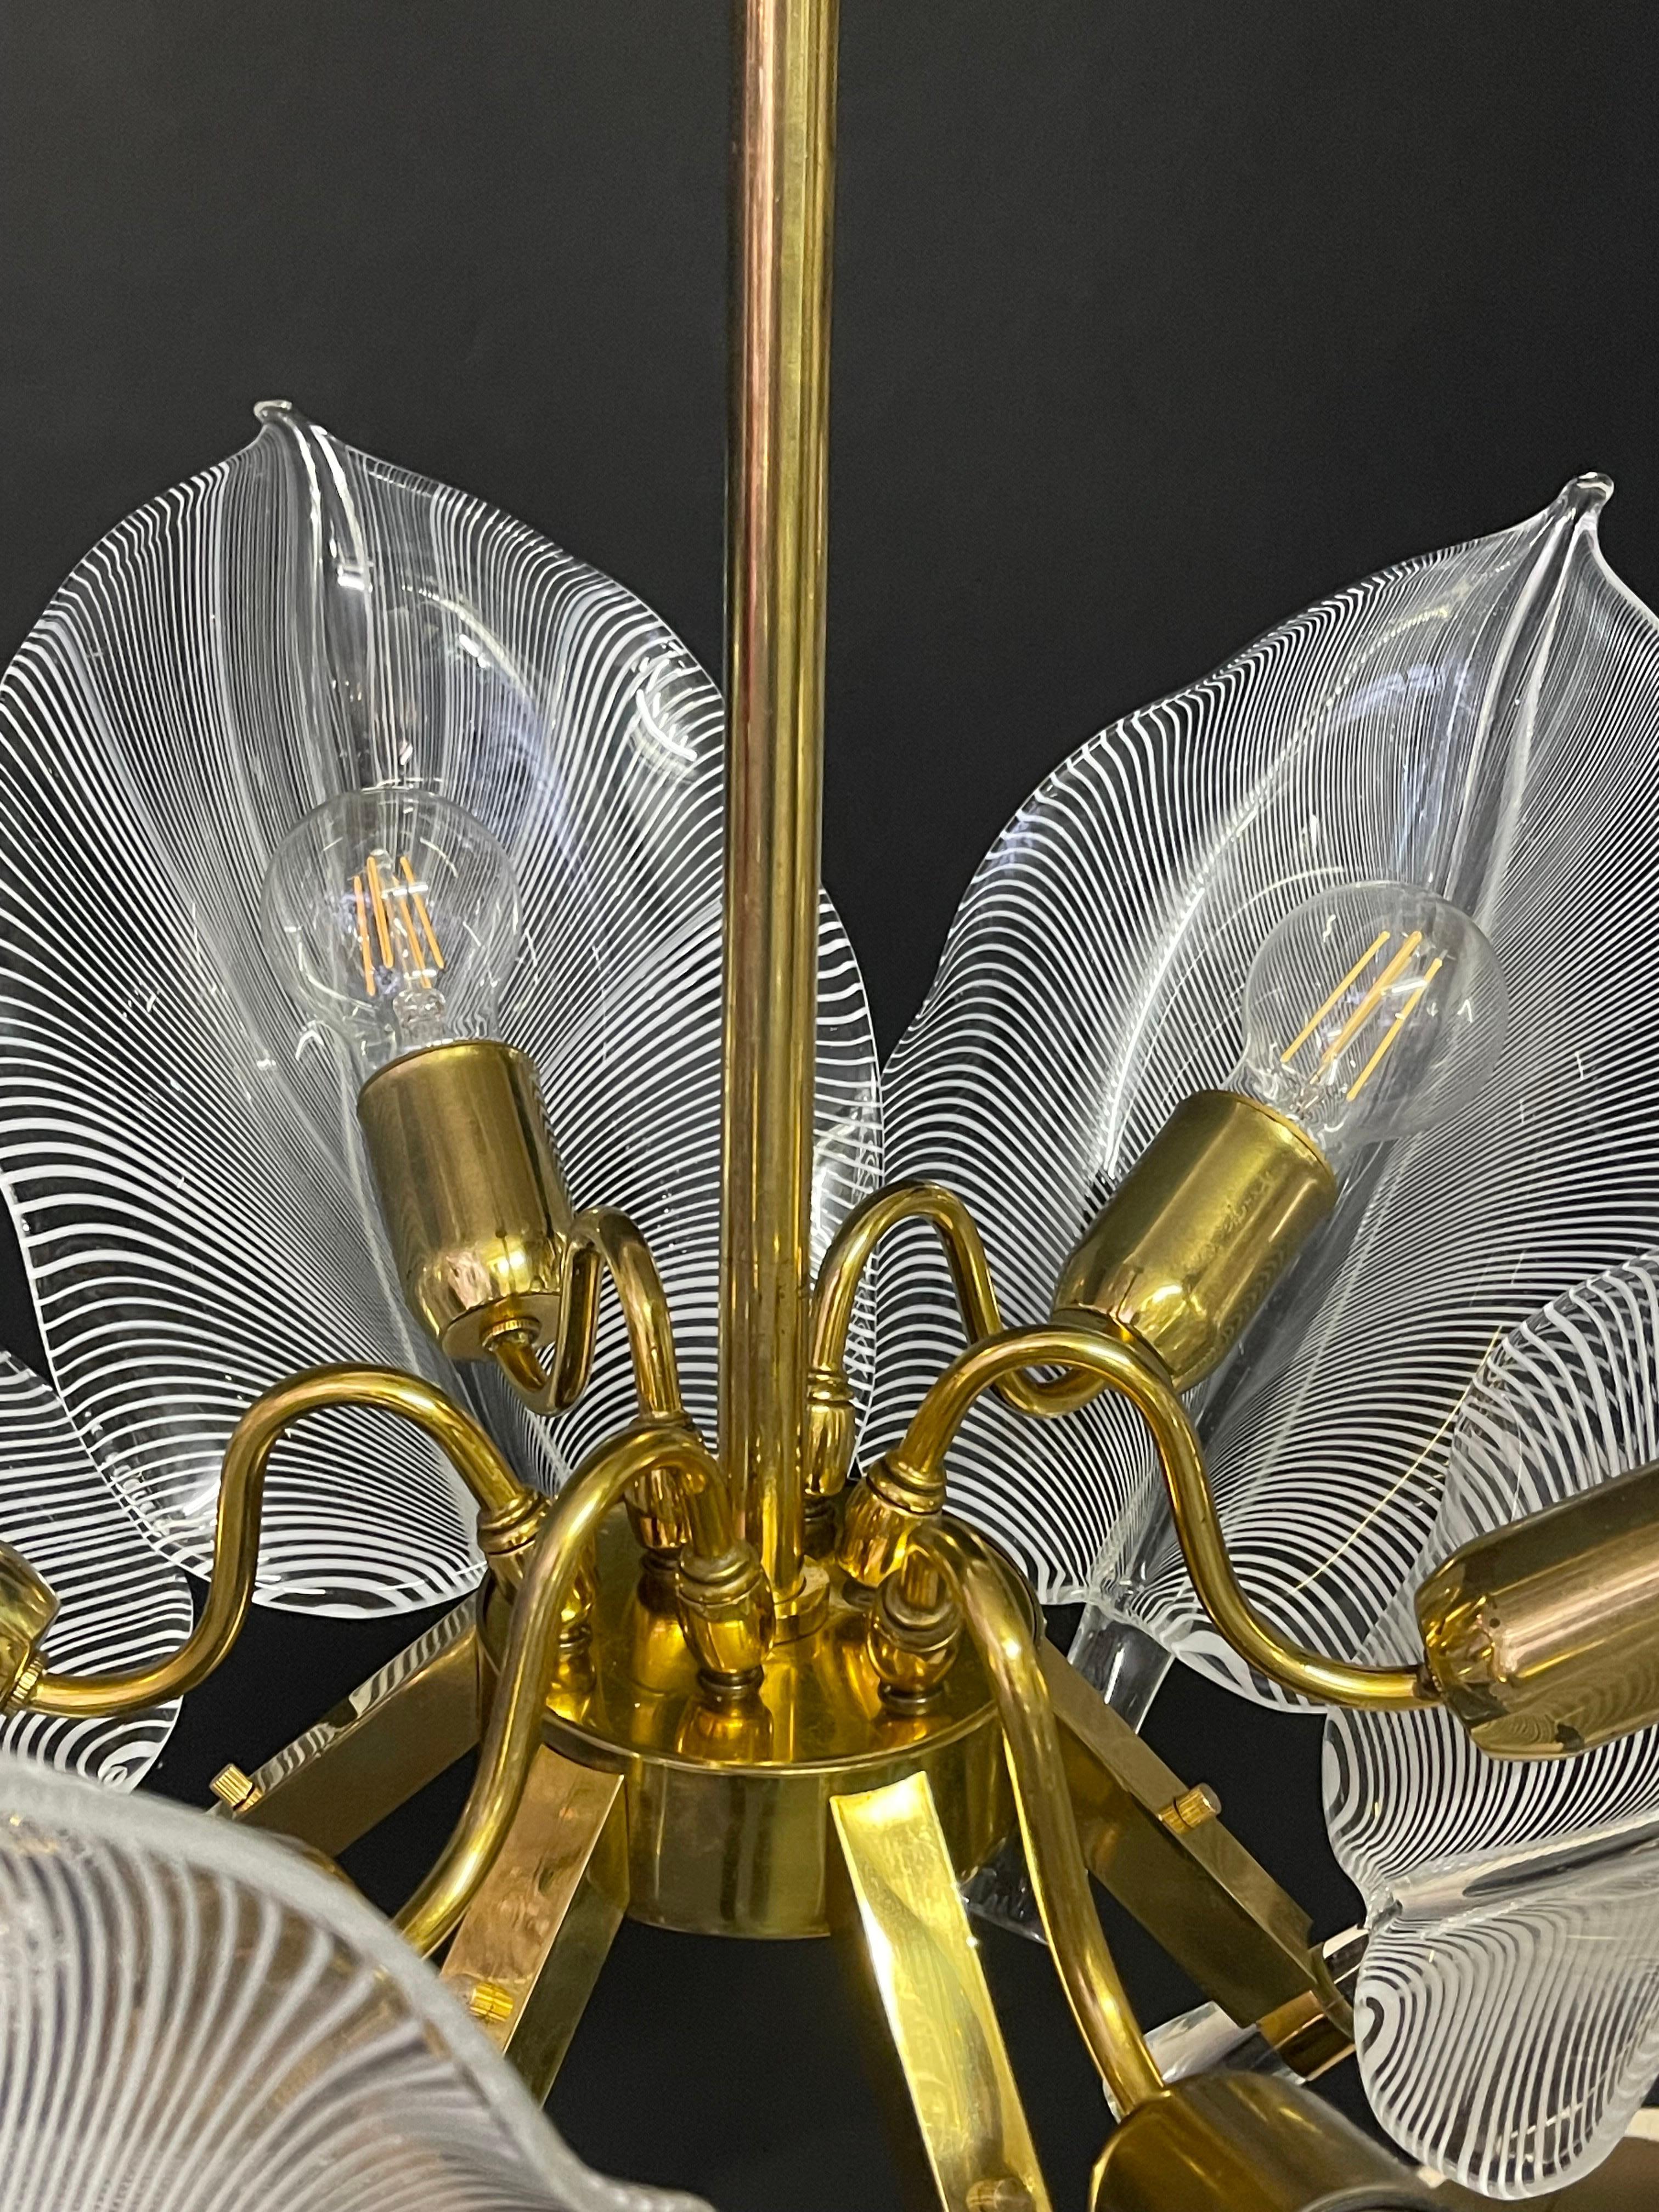 Franco Luce Murano Glass and Brass Chandelier, Italy, circa 1970s (Ende des 20. Jahrhunderts) im Angebot